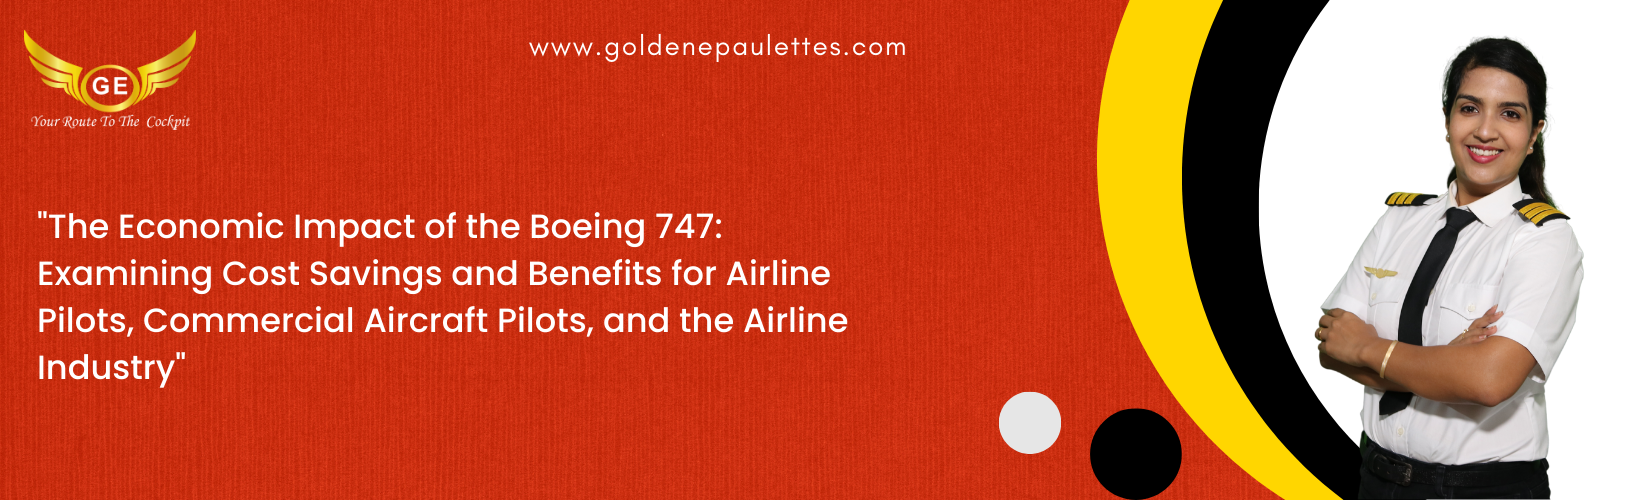 The Economic Impact of the Boeing 747